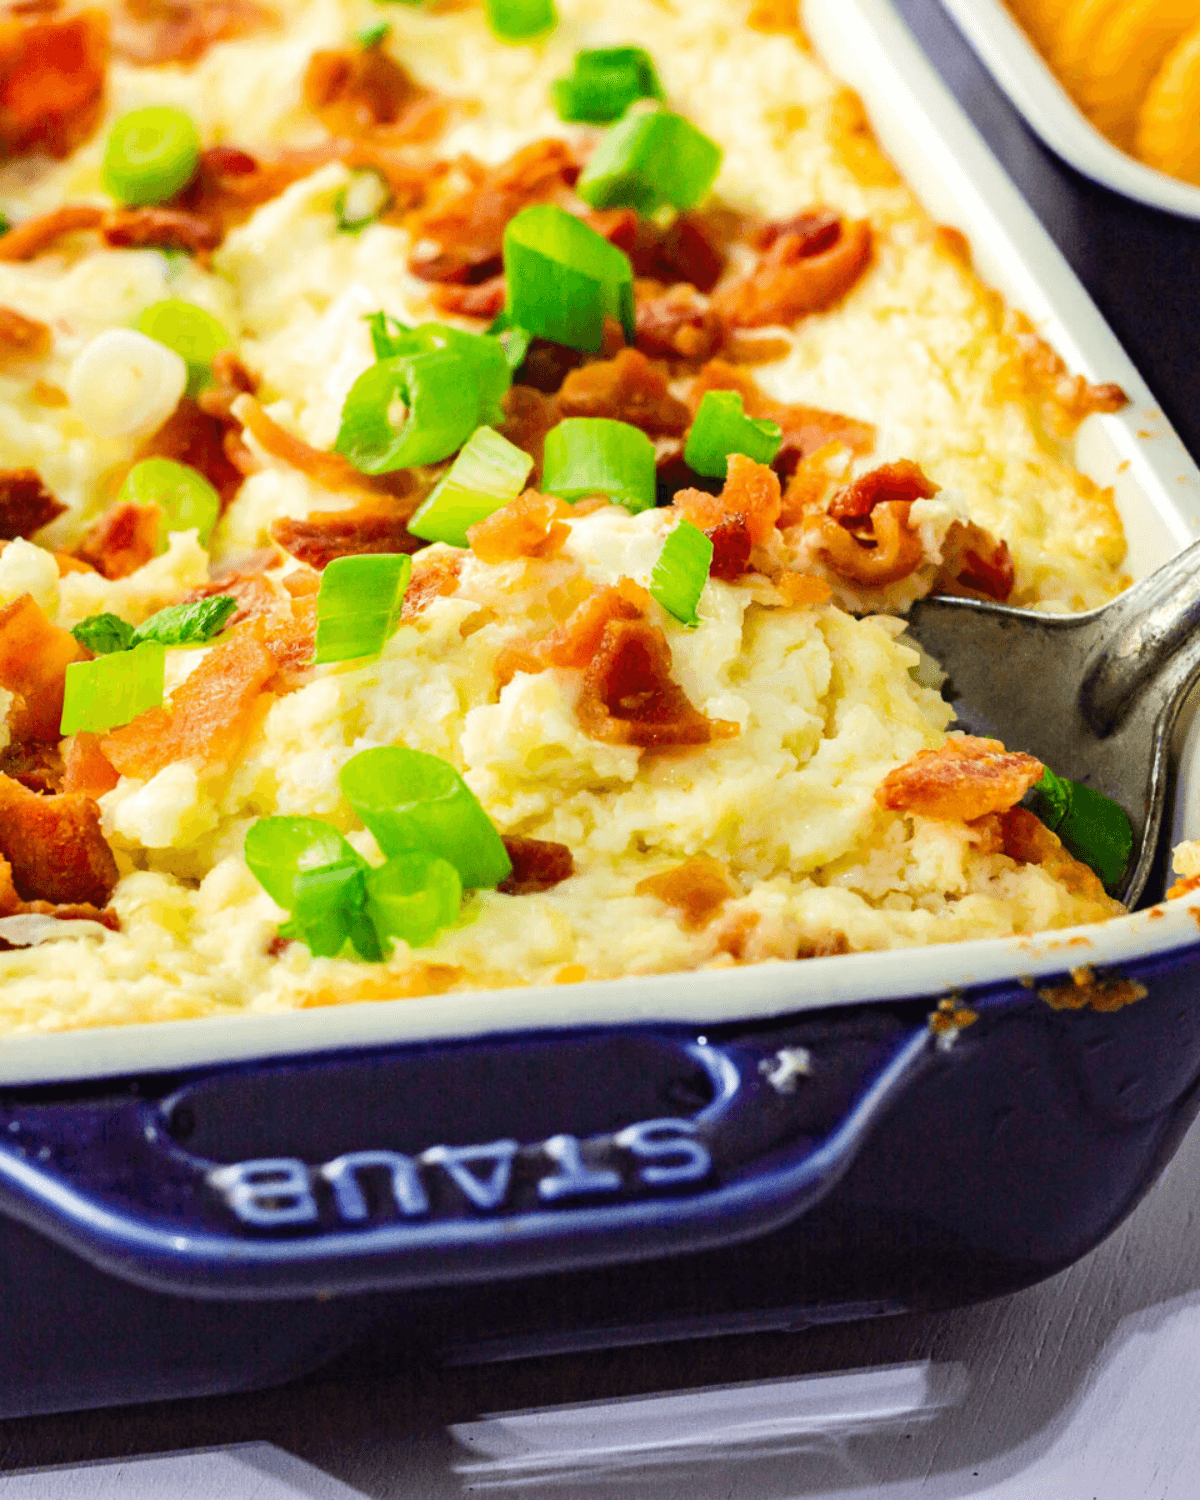 A baked cheese dip with bacon and green onions.